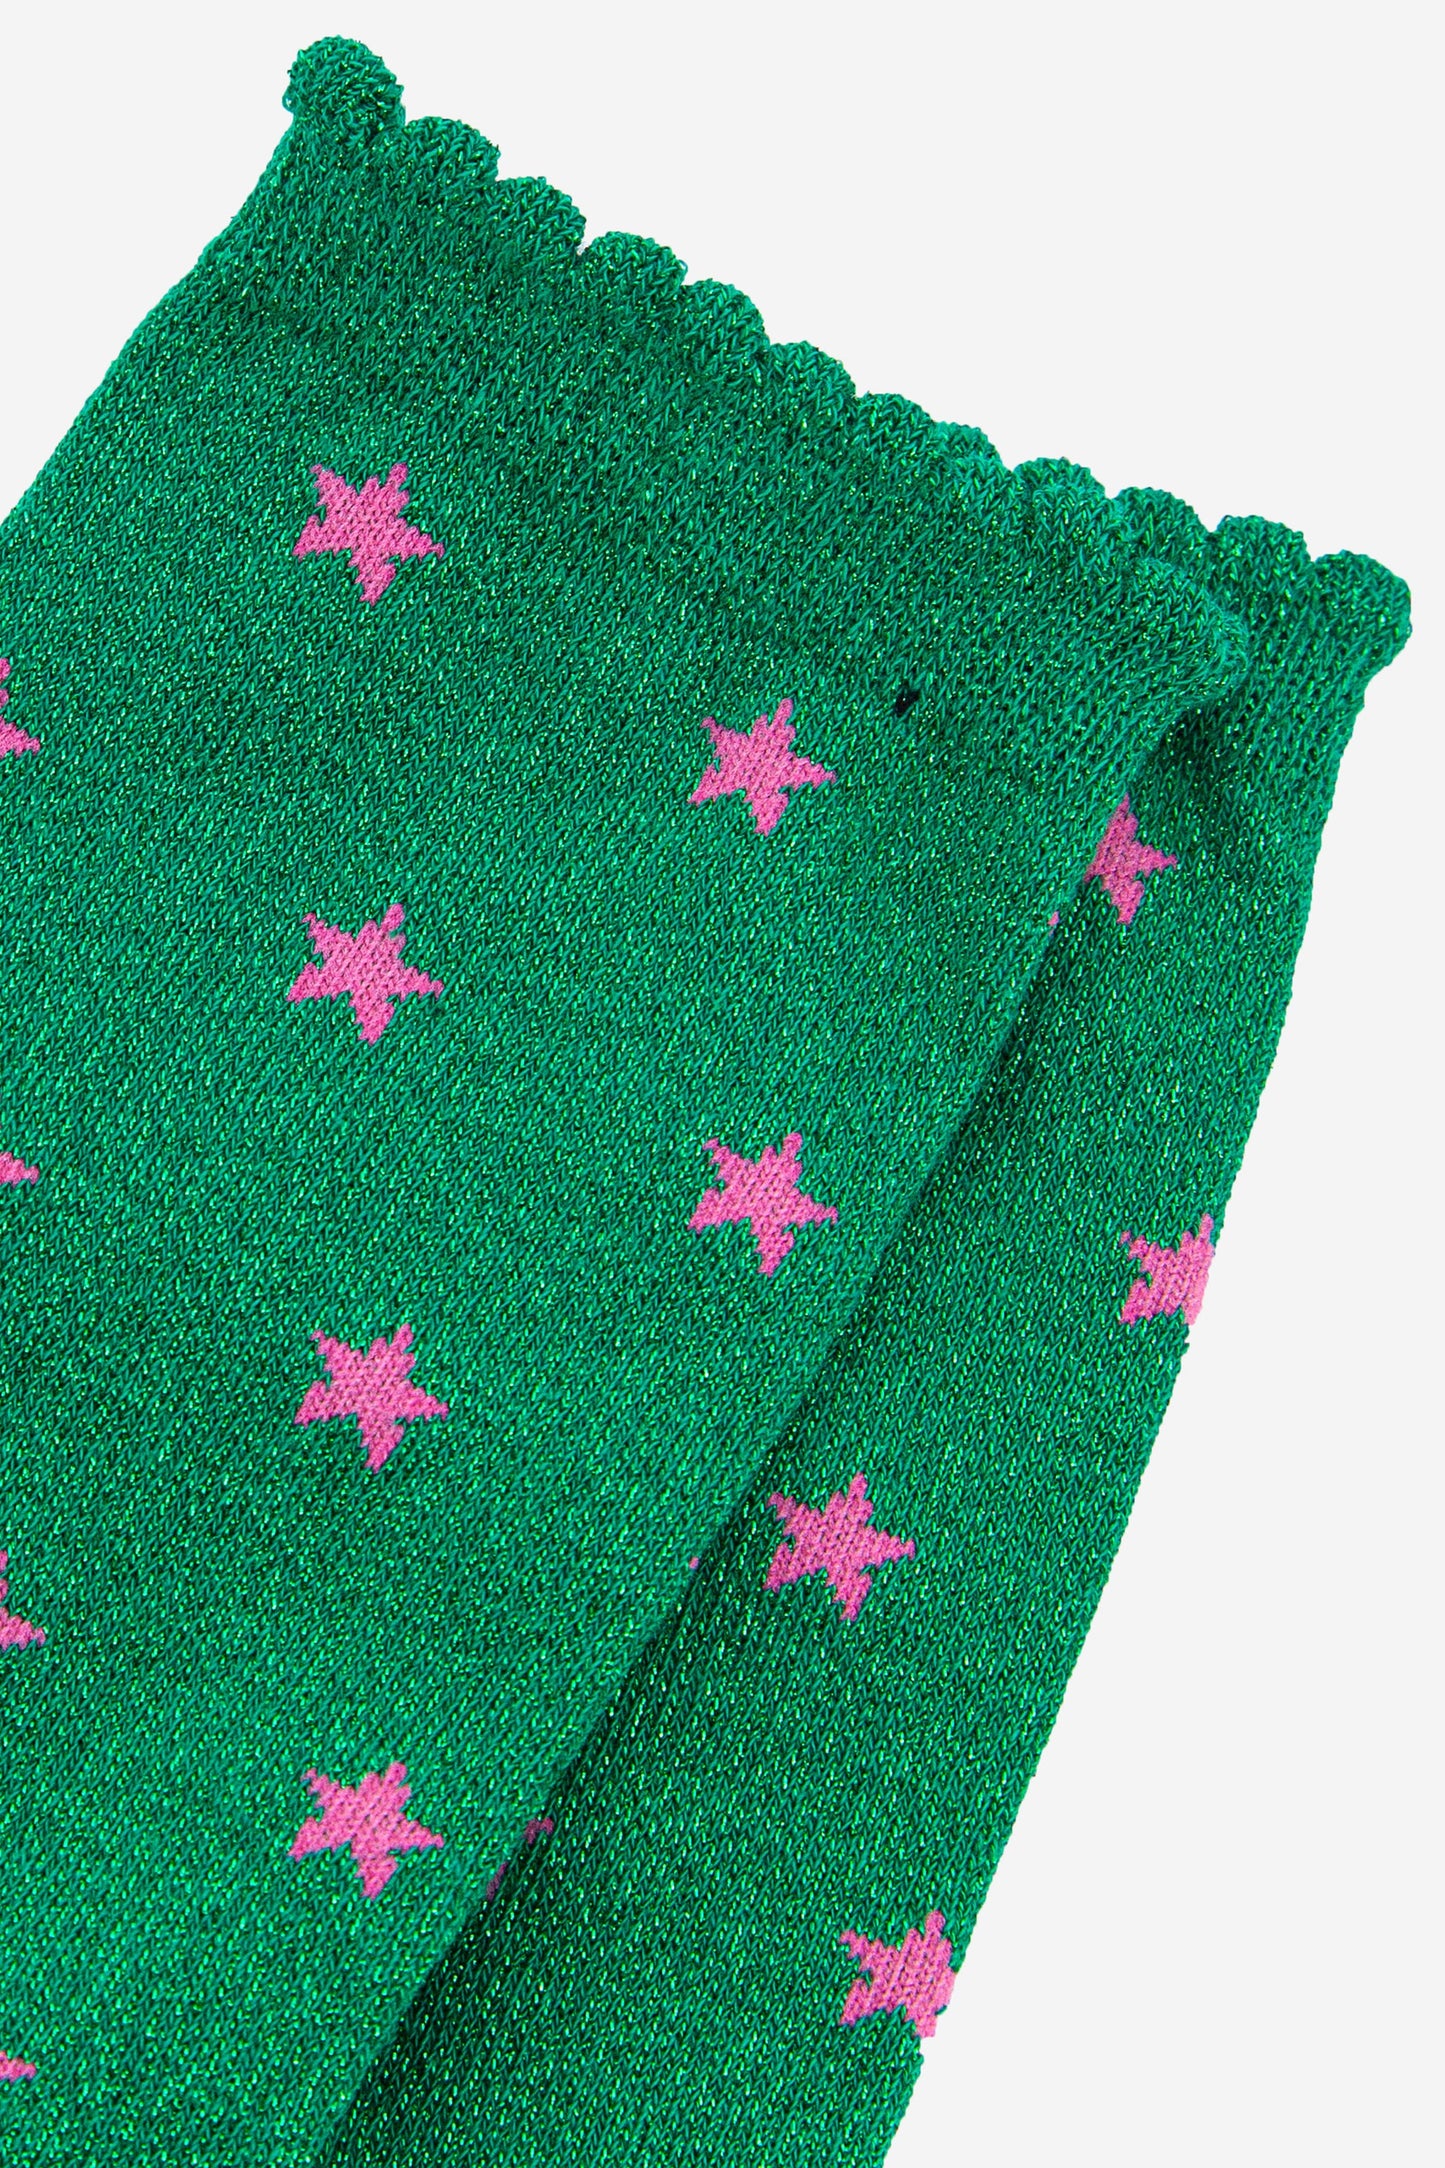 close up of the pink star pattern on the green glitter socks